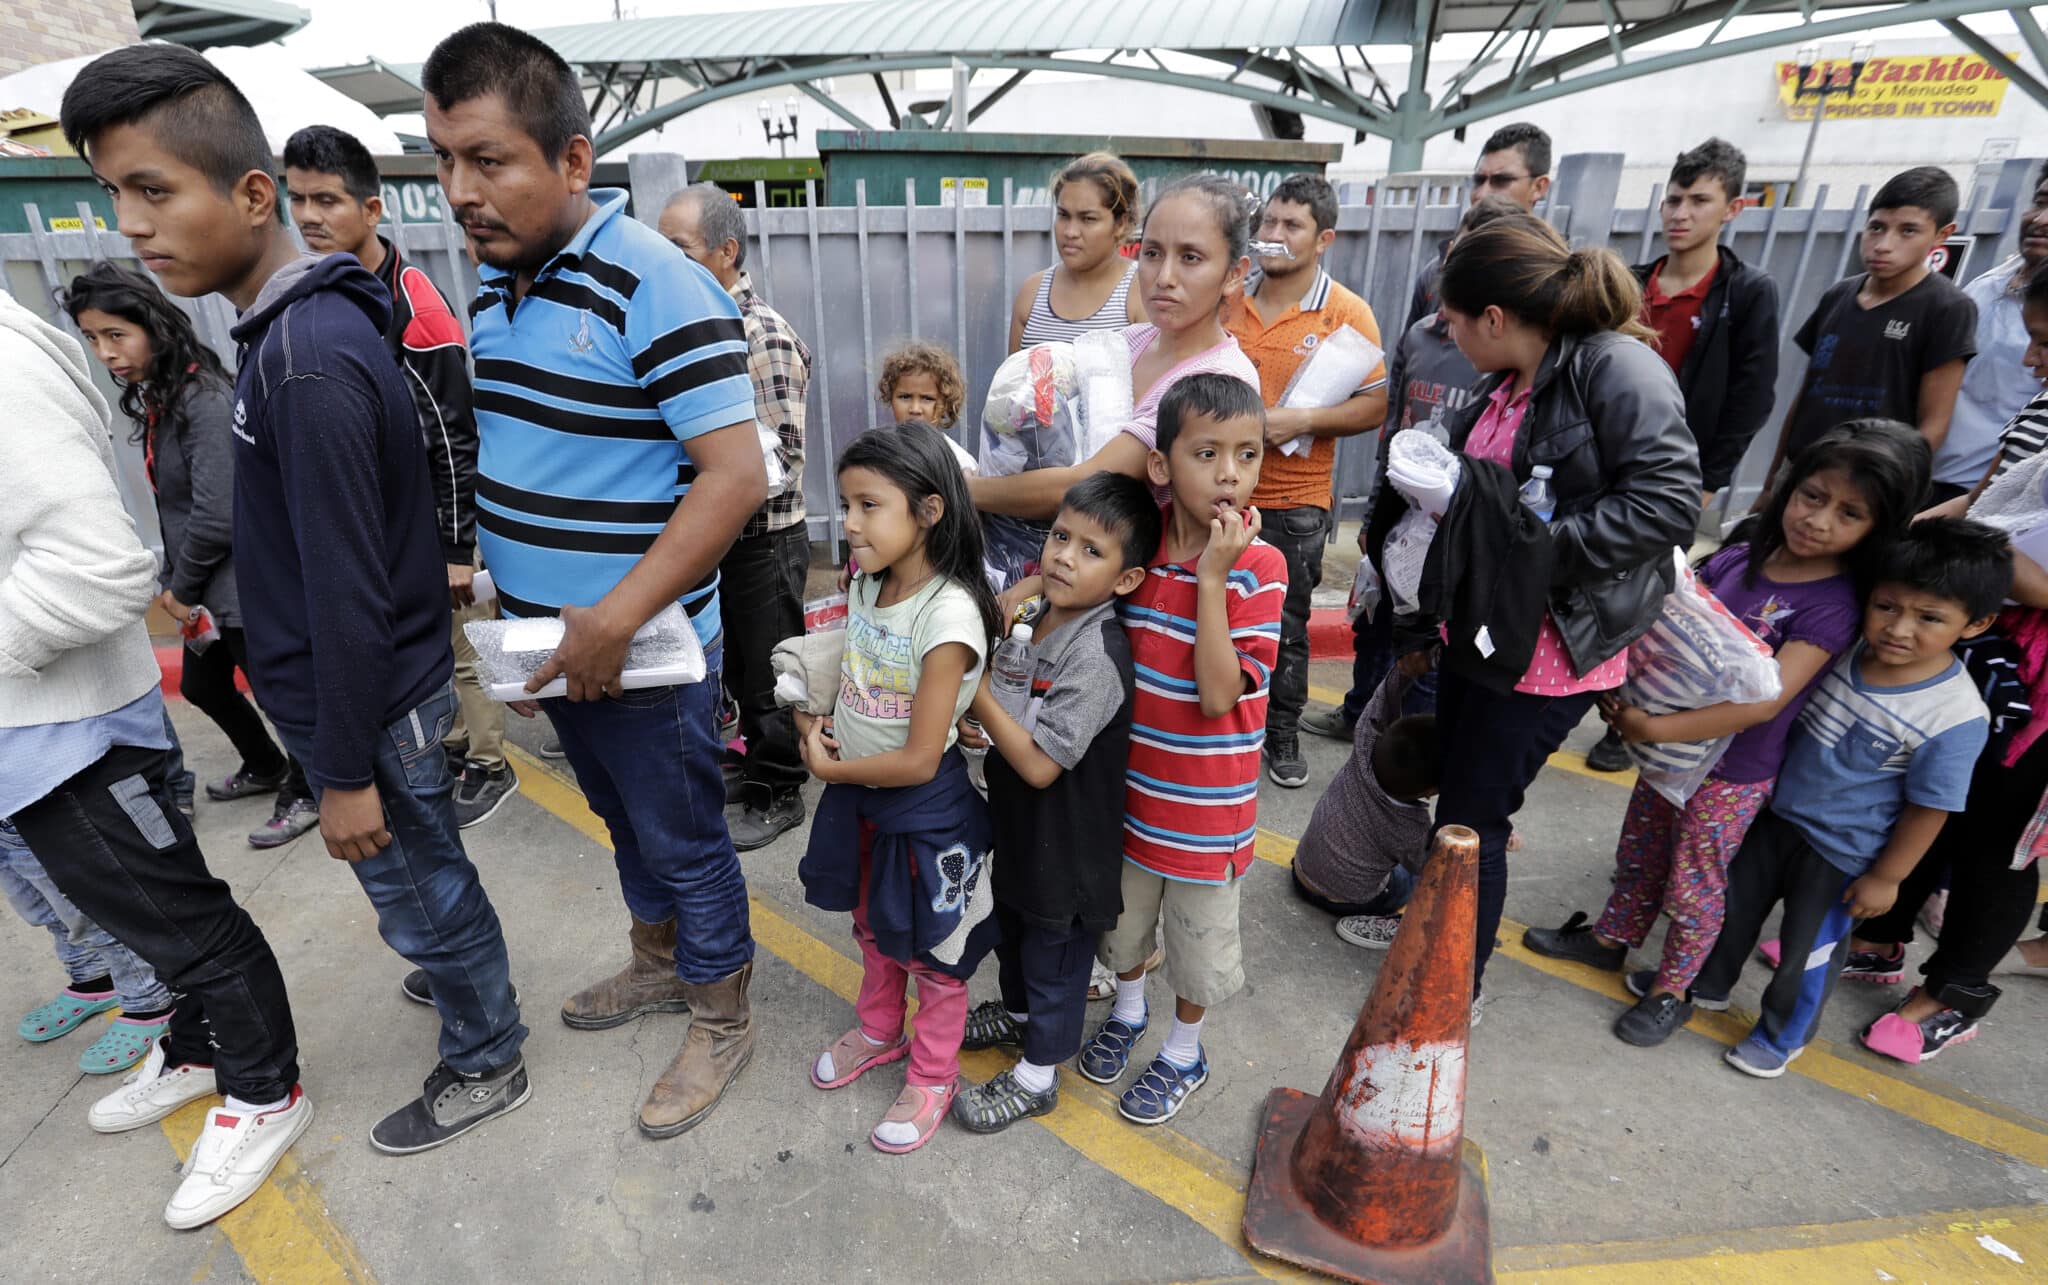 Immigrant families line up to enter the central bus station after they were processed and released by U.S. Customs and Border Protection, Sunday, June 24, 2018, in McAllen, Texas. (AP Photo/David J. Phillip, File)